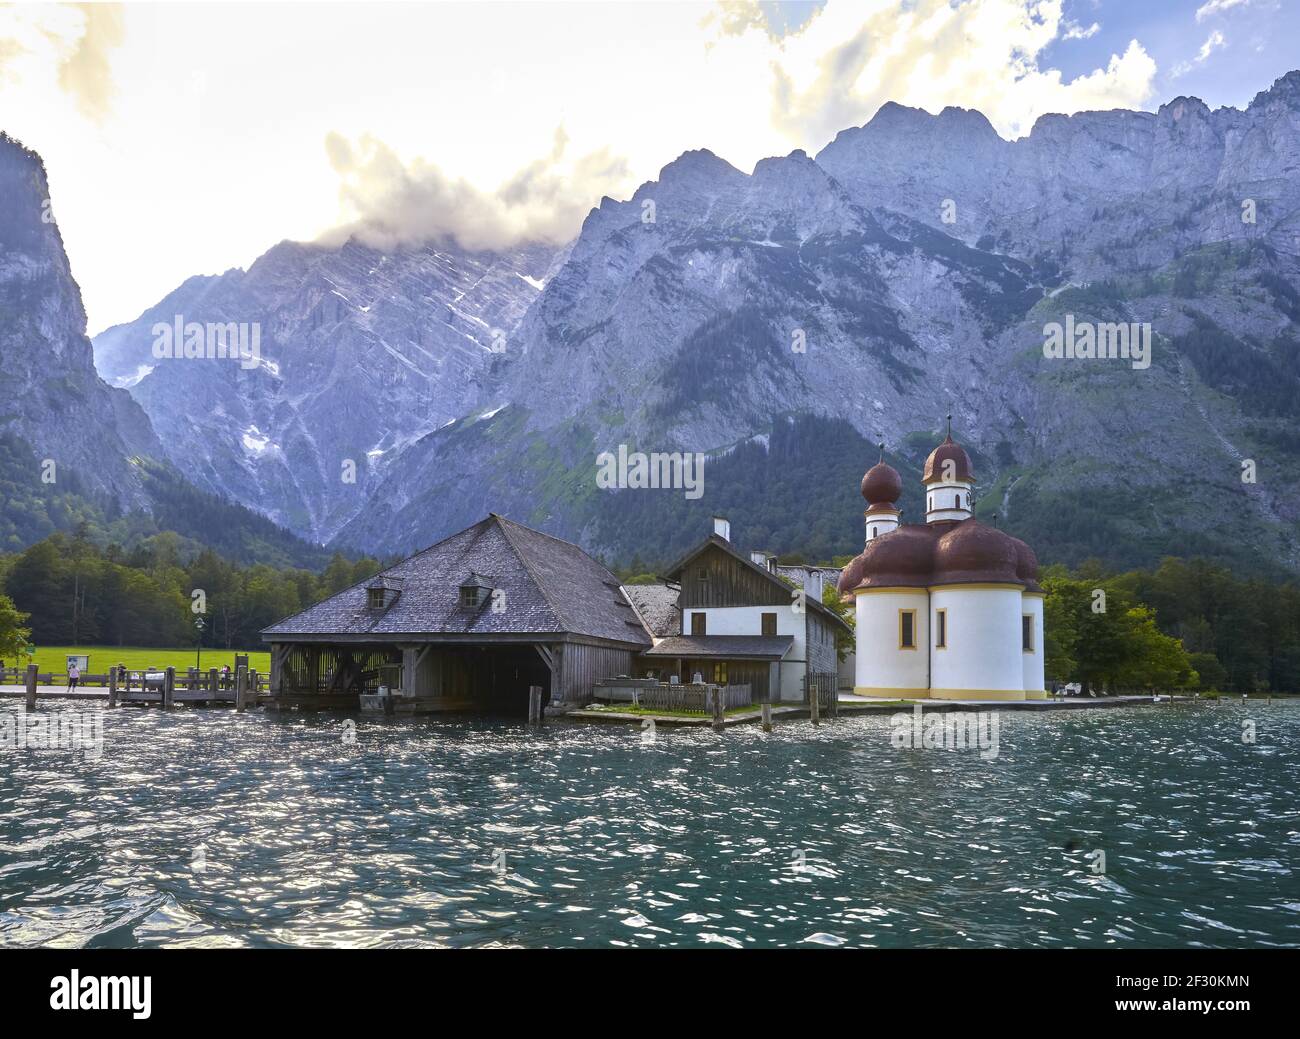 Bavarian impressions at Koenigssee, Germany. With the famous pilgrimage church of St. BartholomÃ¤. Stock Photo